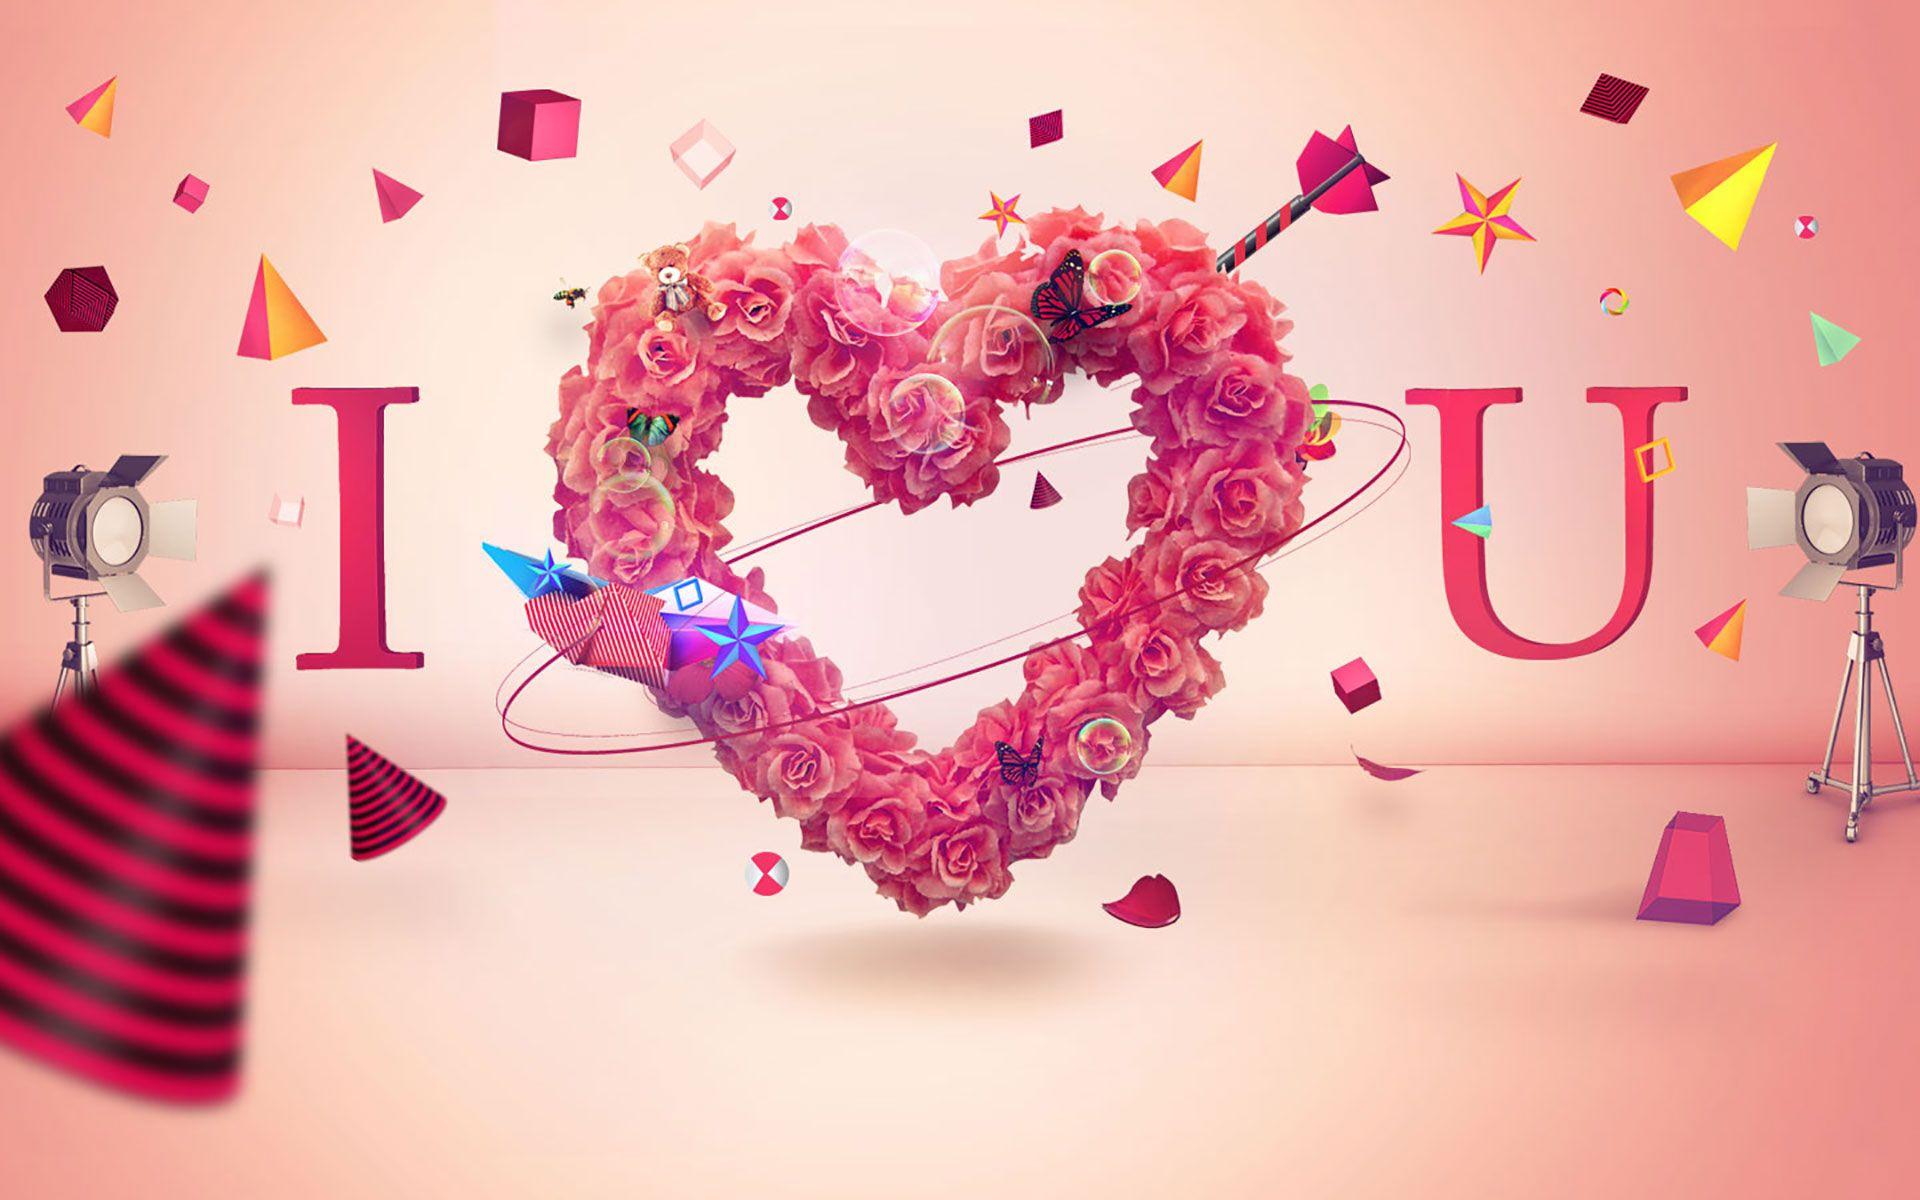 Best I Love You Image Collection for Whatsapp. HD Wallpaper